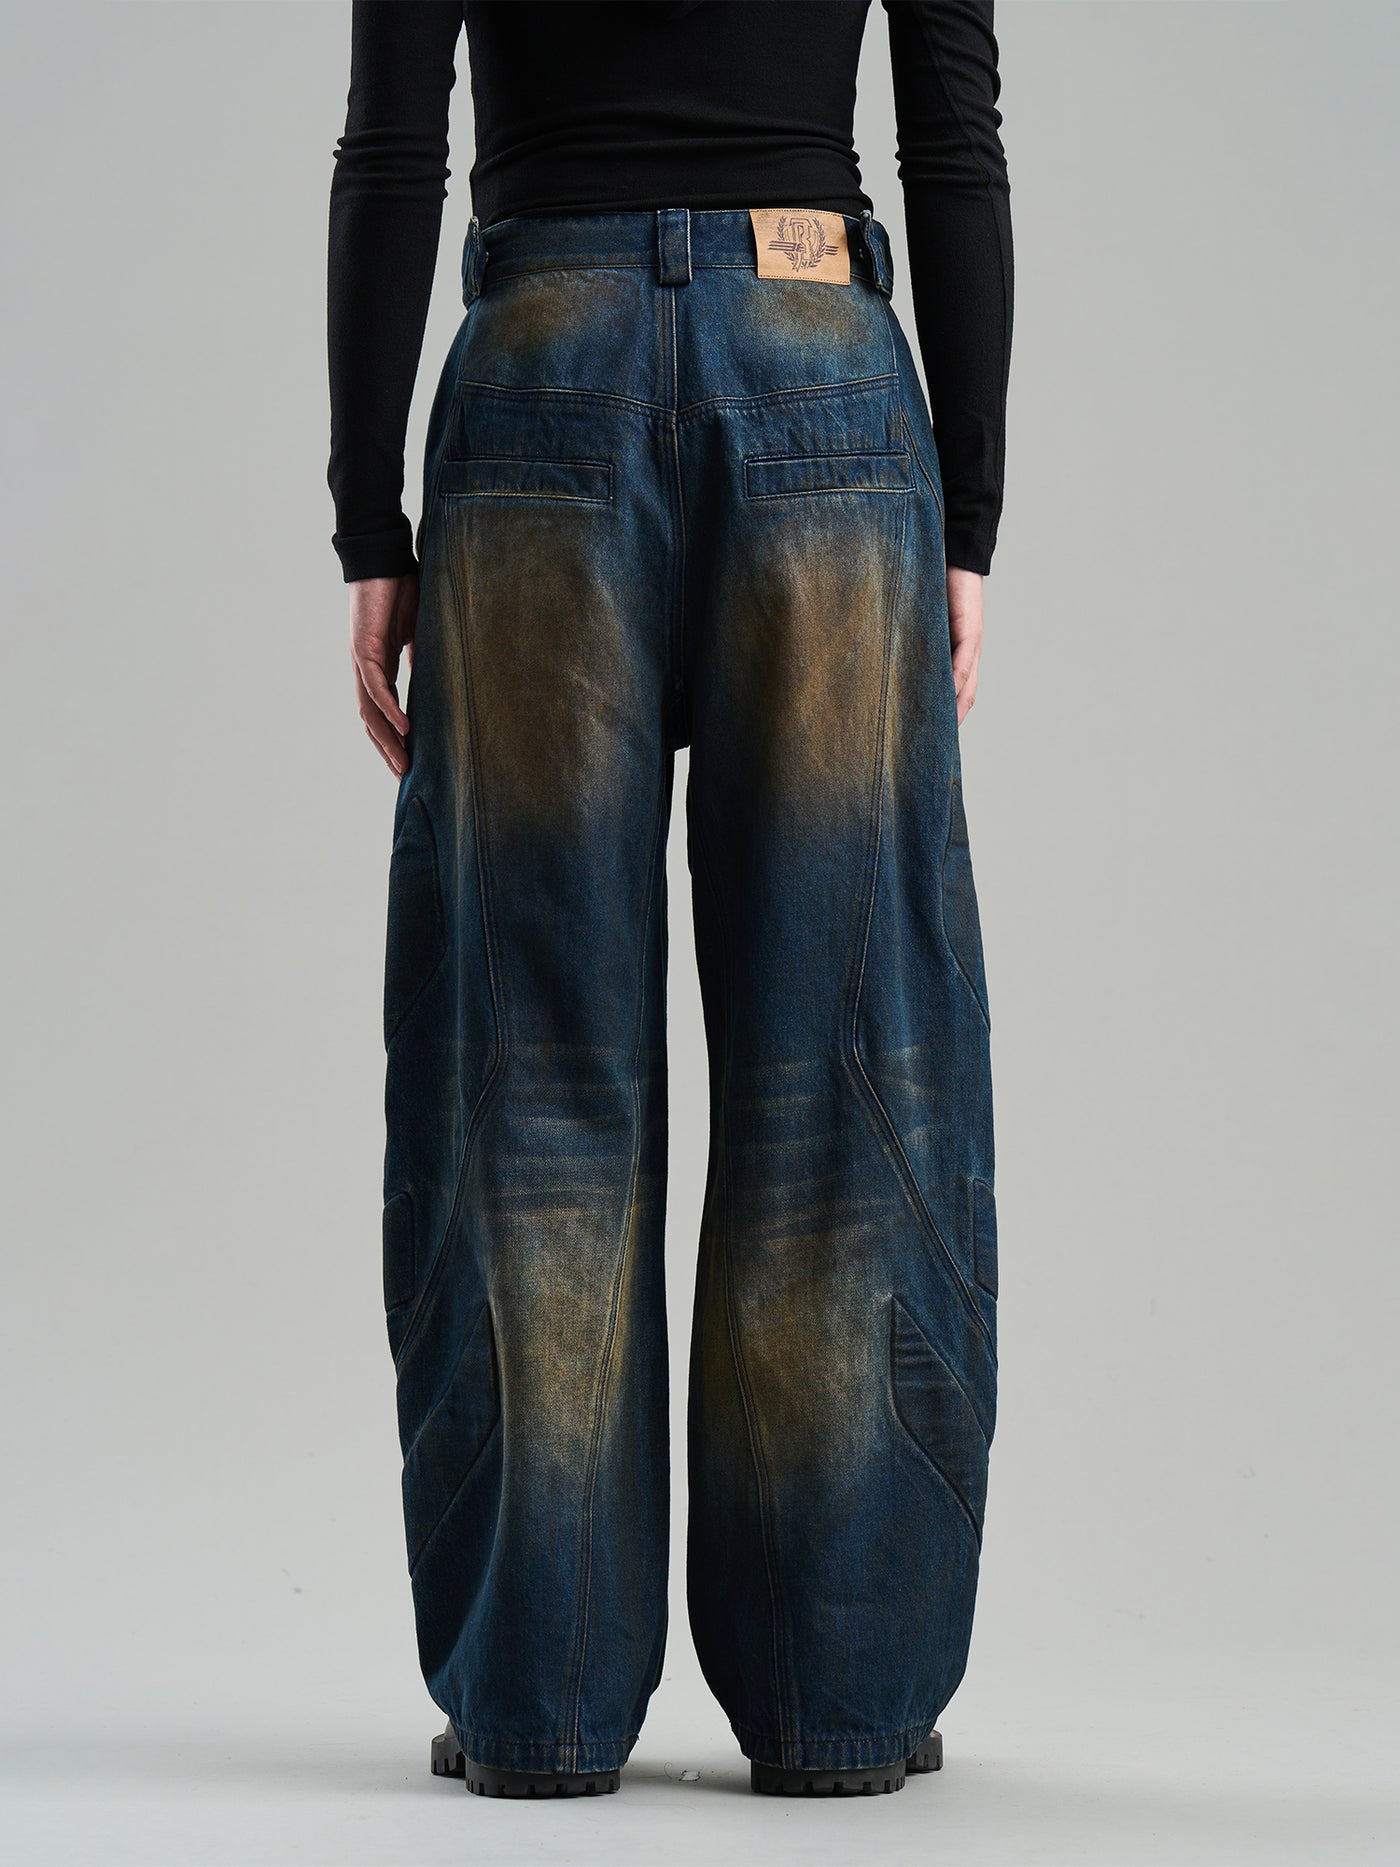 BLIND NO PLAN Mud Stained & Rusted Denim Jeans